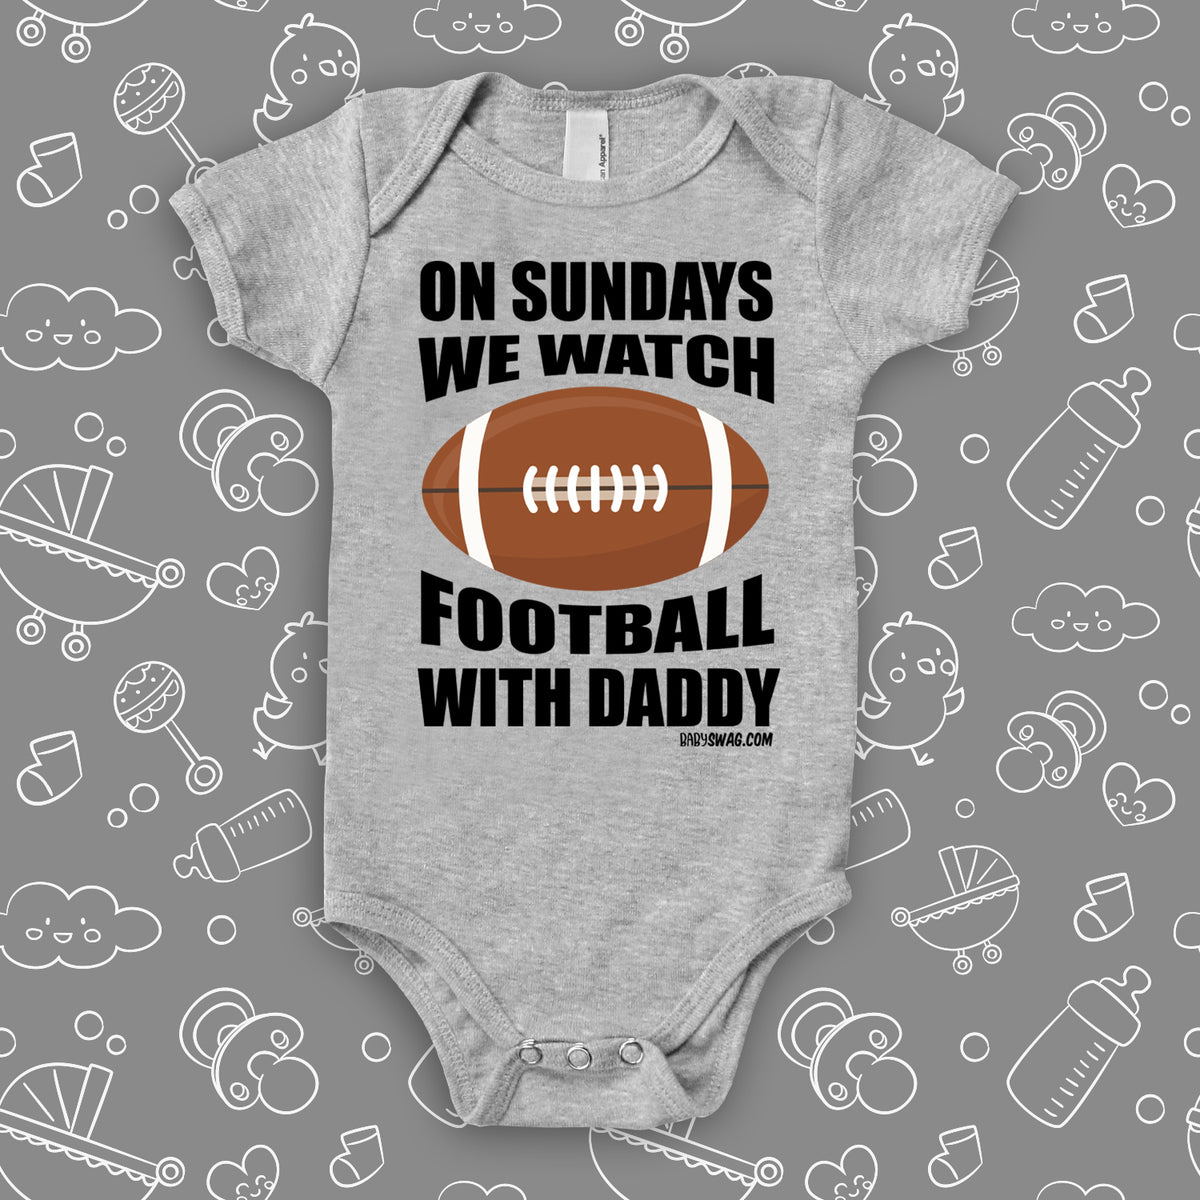 On Sunday We Watch Football With Daddy | Baby Swag